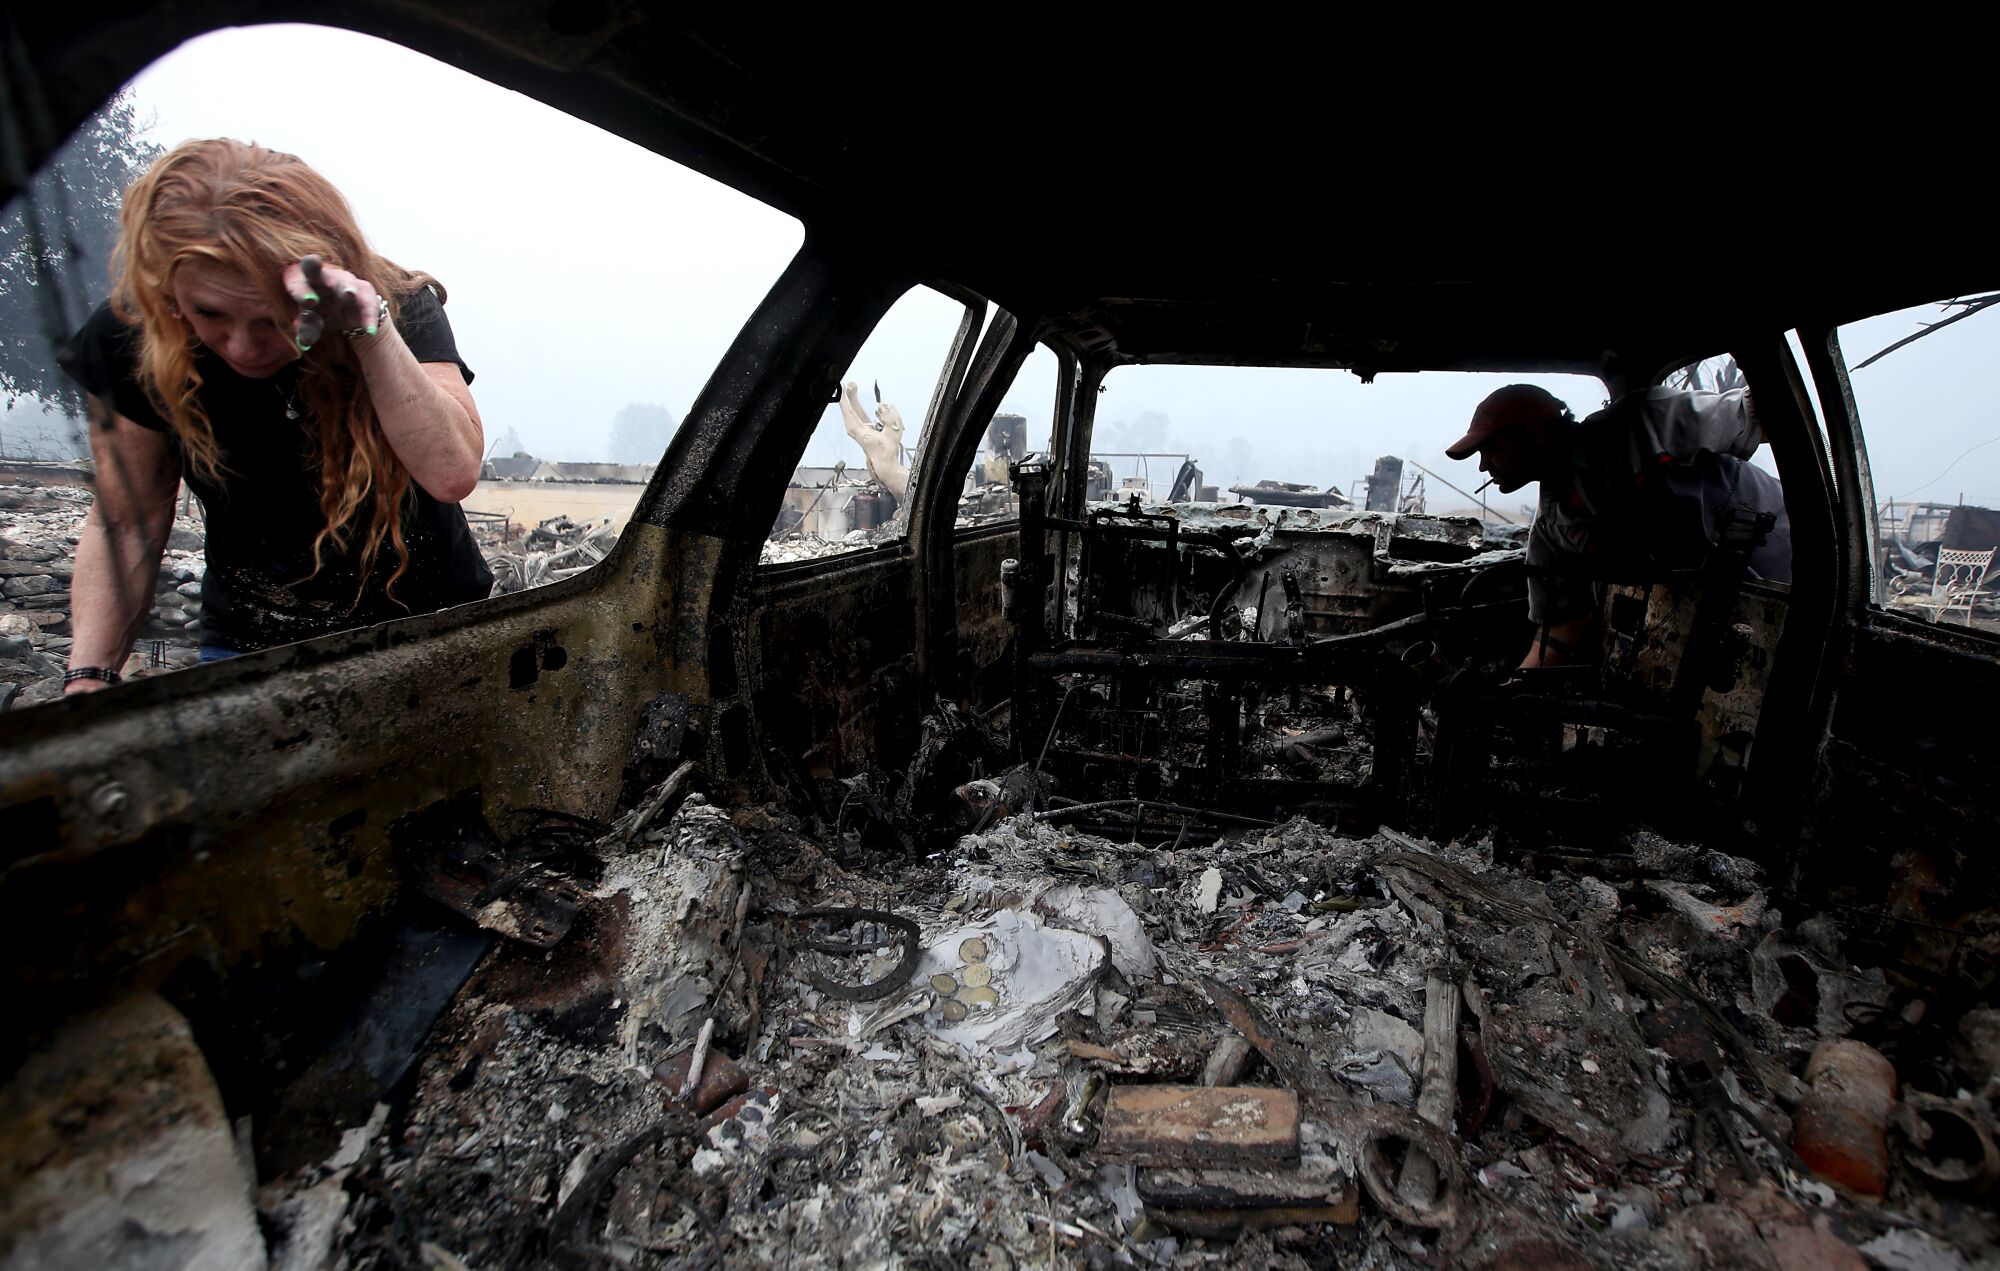 Sherri Marchetti-Perrault and James Benton embrace as they sift through the remains of their home near Yreka, Calif.